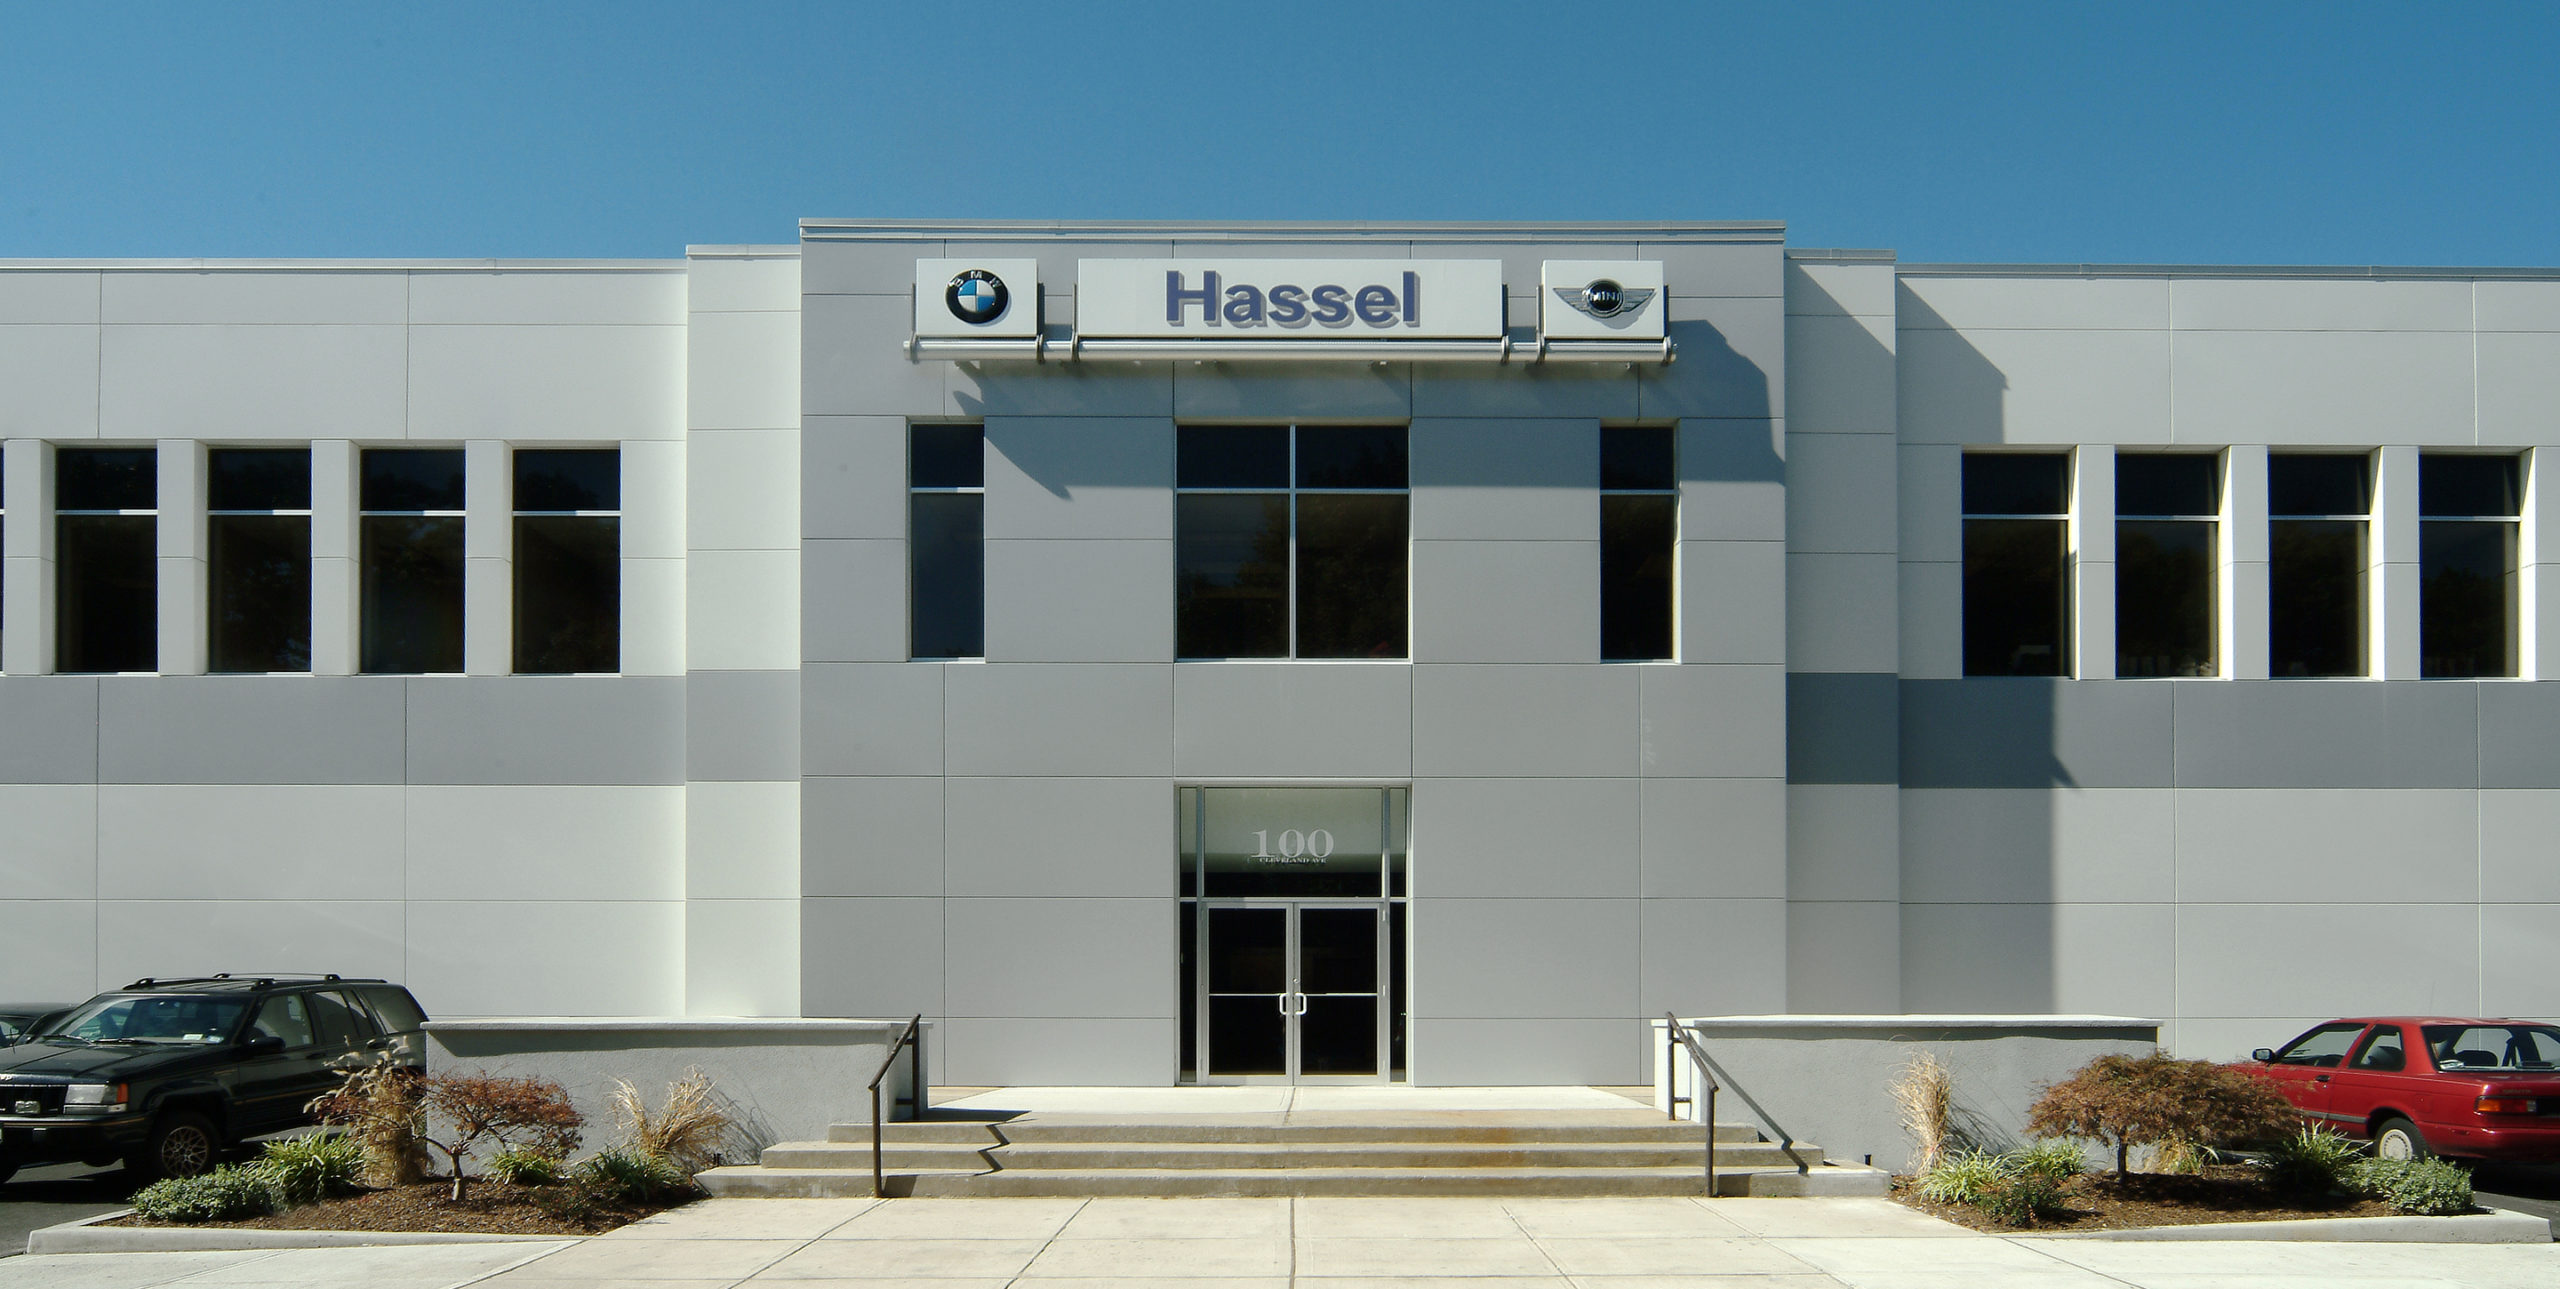 Exterior of Hassel BMW in Freeport